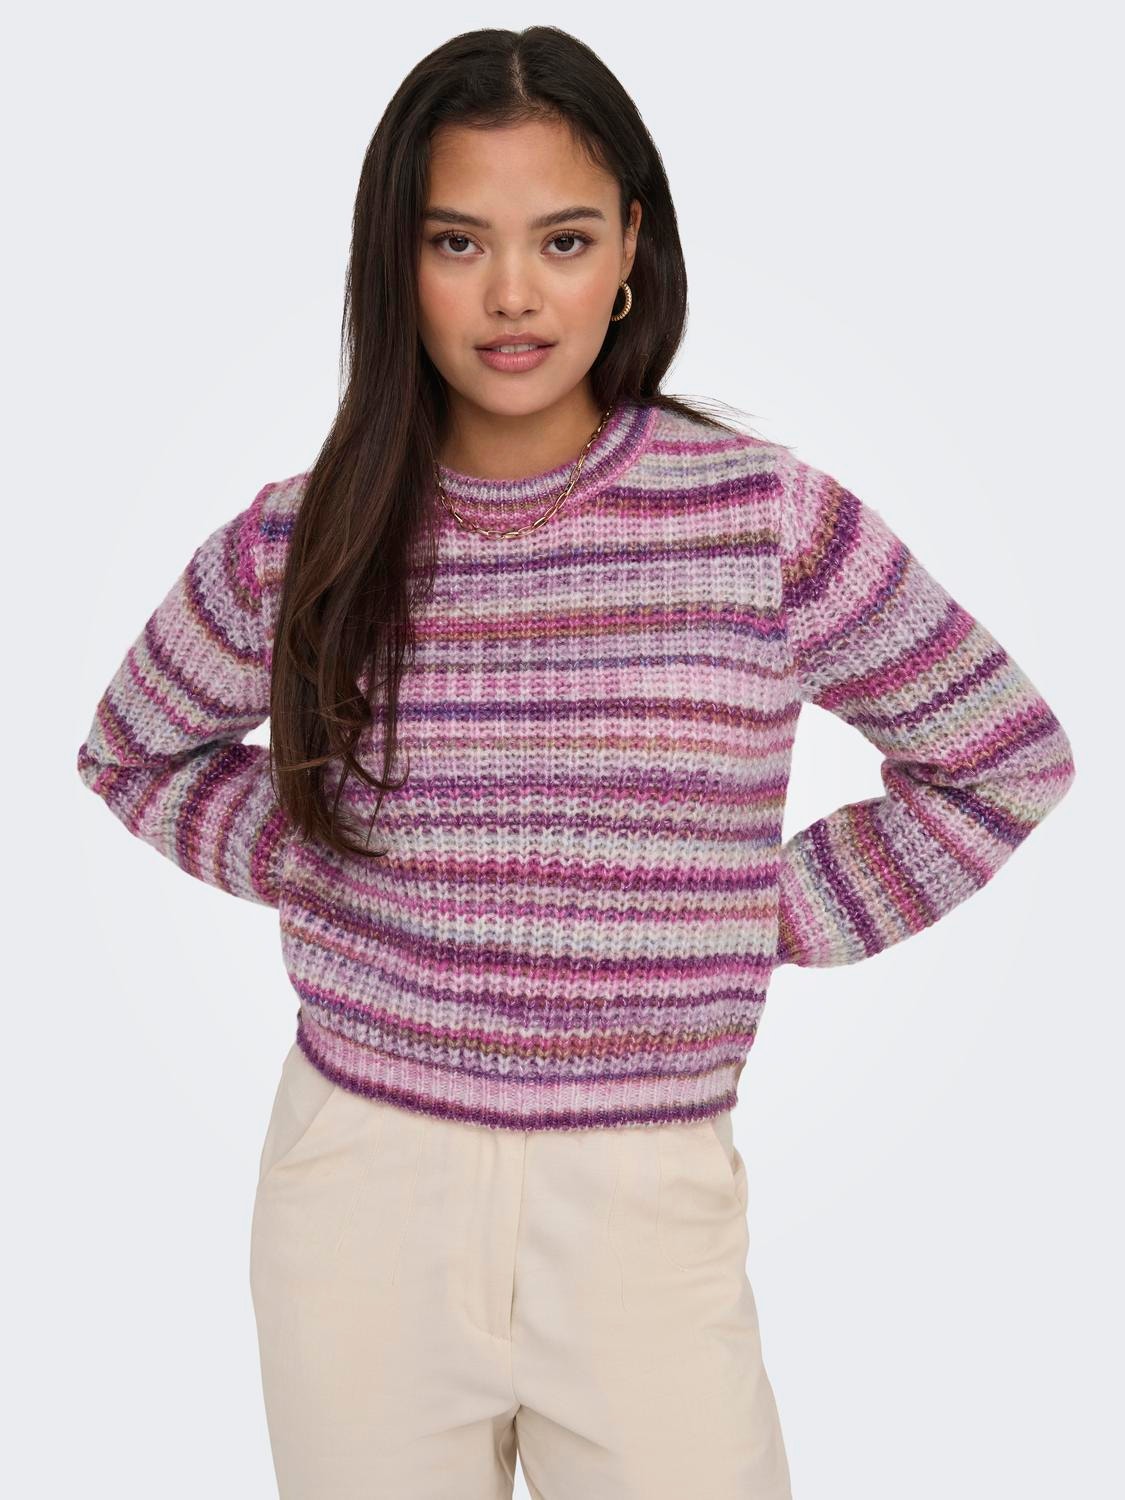 ONLY Round Neck Pullover -Deep Orchid - 15324080